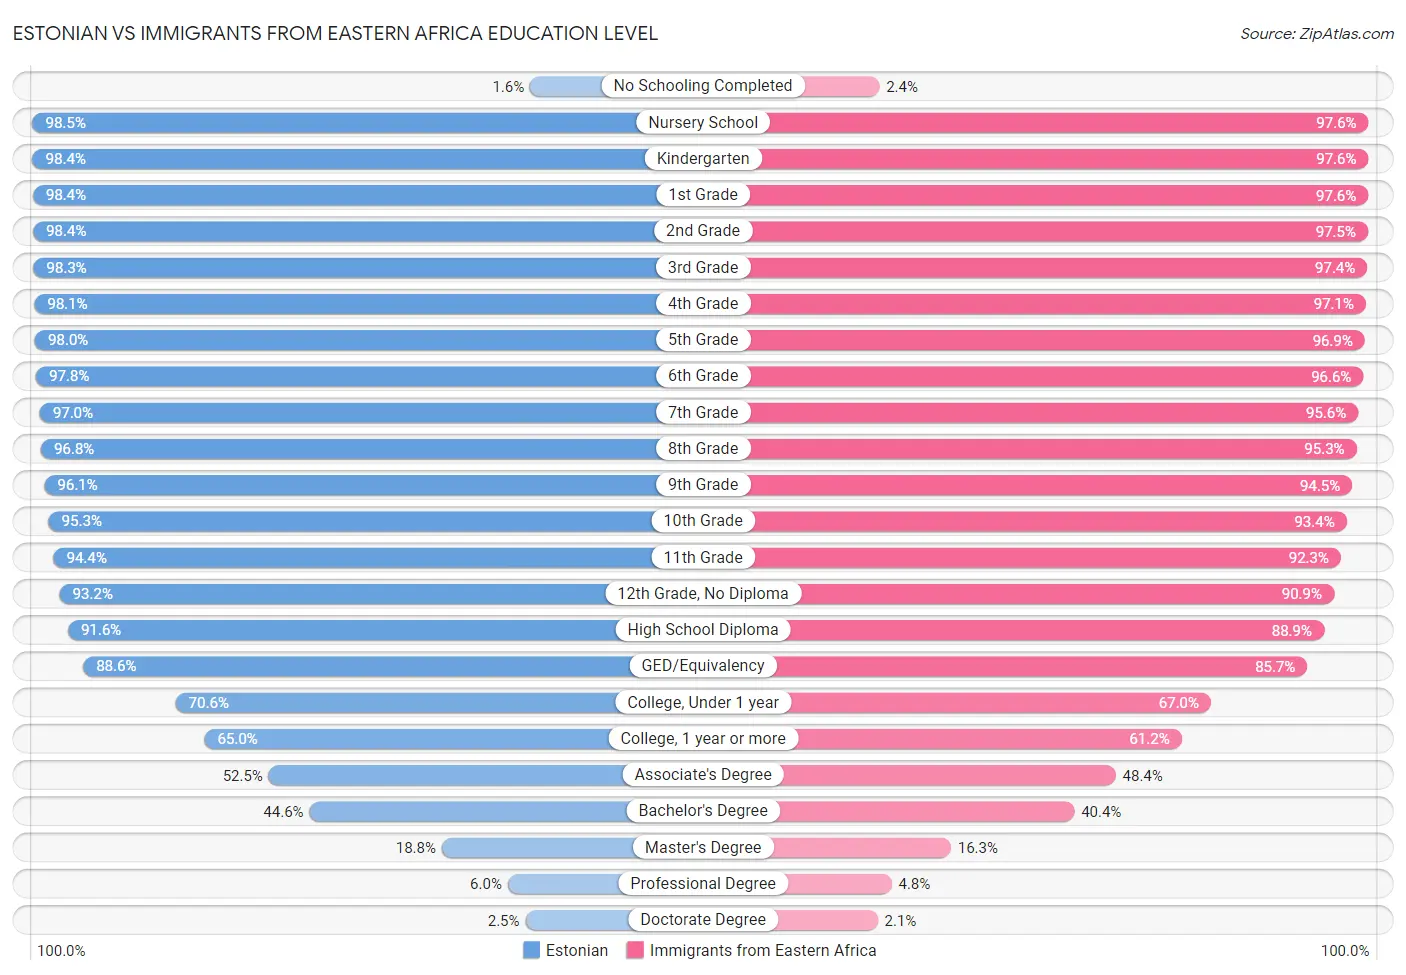 Estonian vs Immigrants from Eastern Africa Education Level